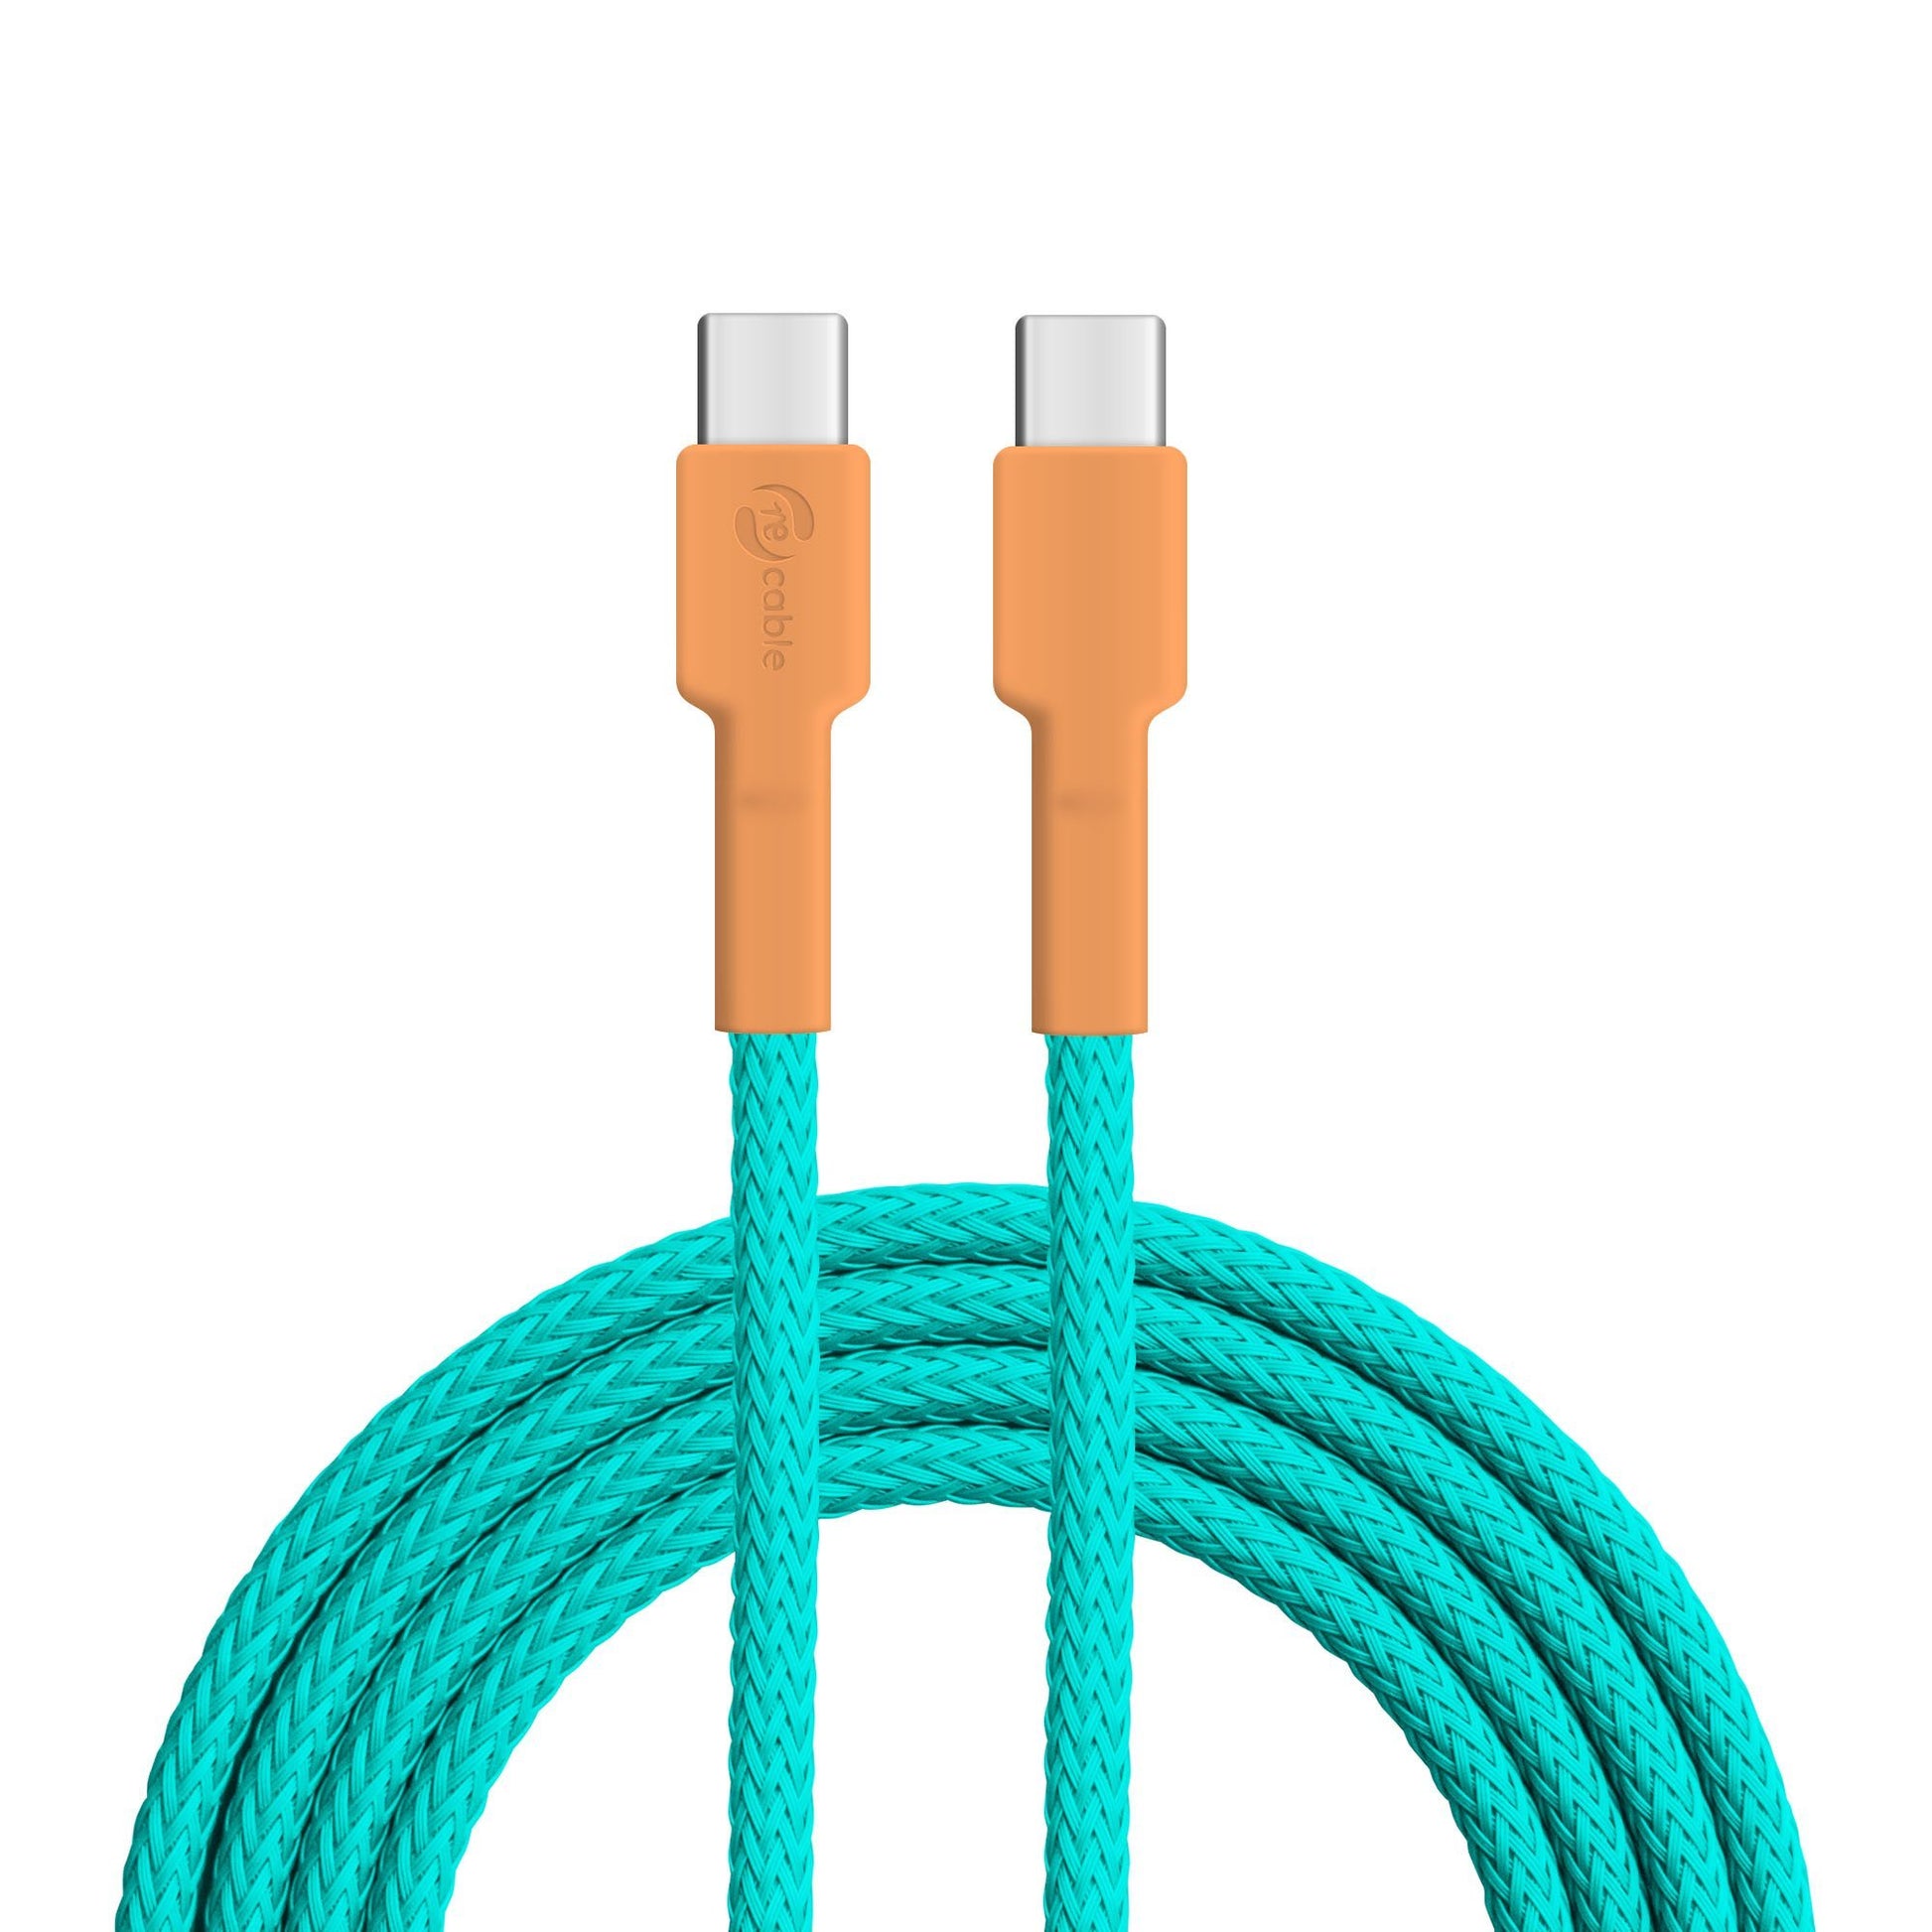 USB cable, Design: Kingfisher, Connections: USB C on USB C